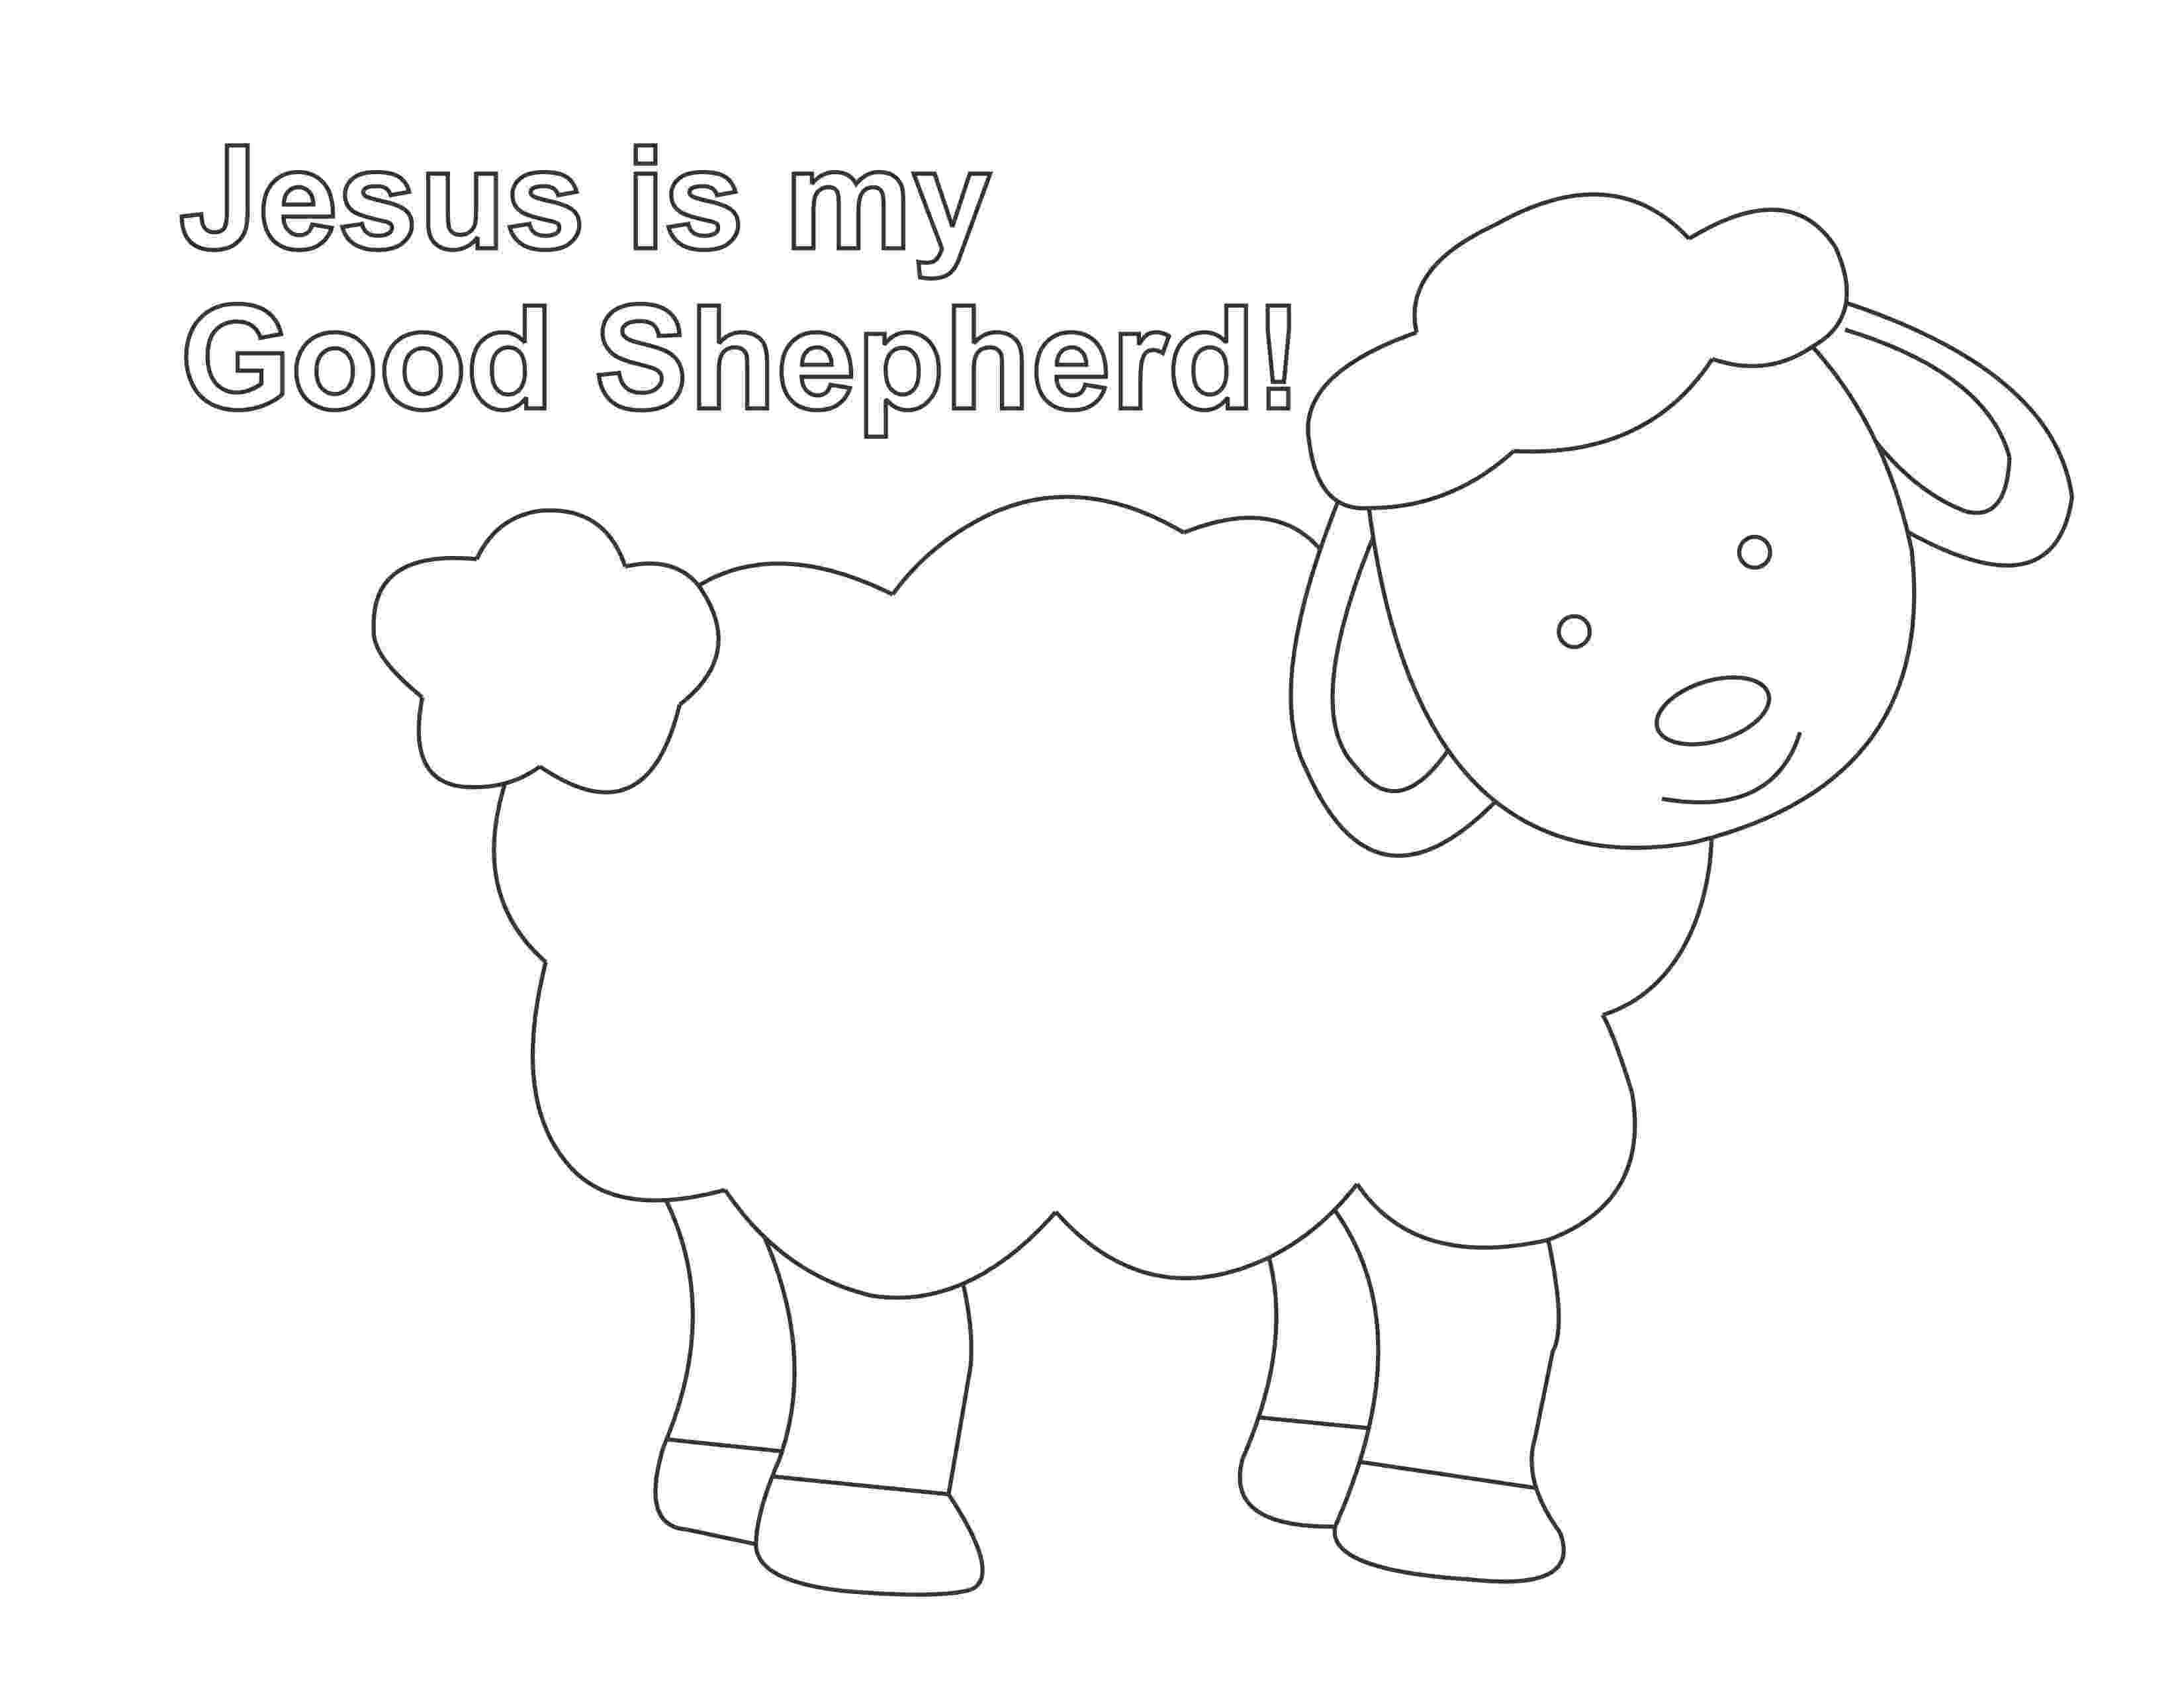 the good shepherd coloring page parable of the good shepherd the good shepherd the shepherd coloring good page 